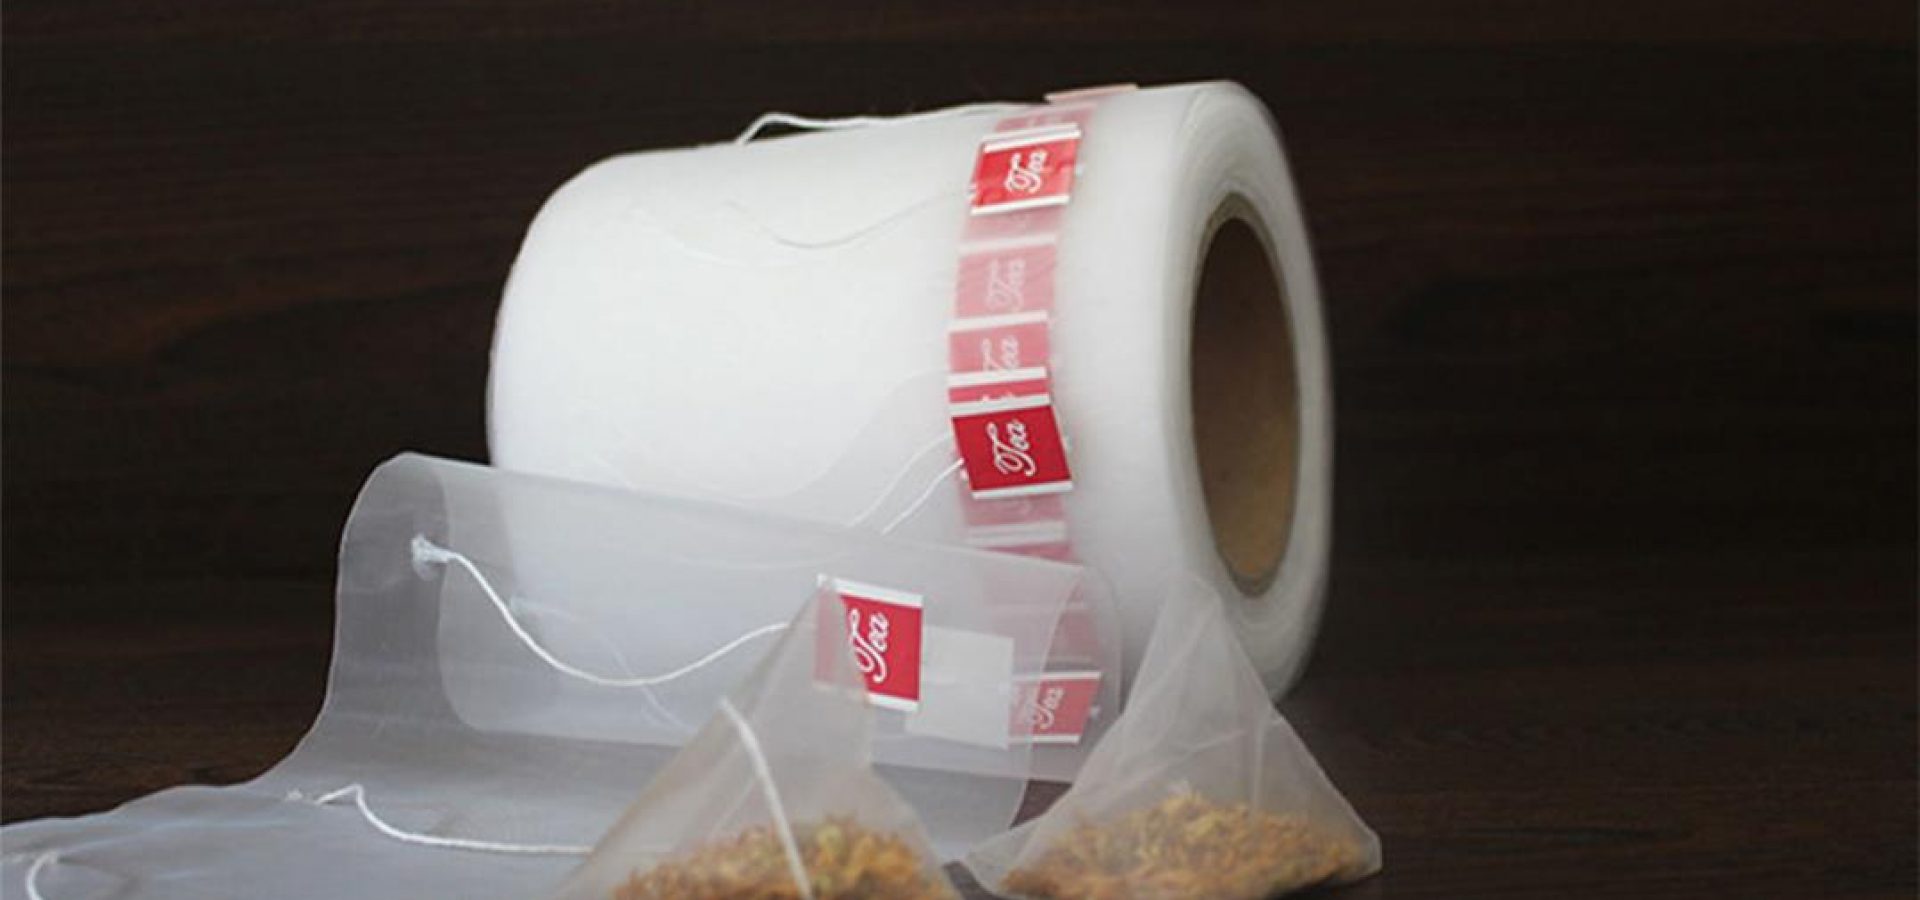 Wholesale-Nylon-Triangle-Mesh-Pyramid-Heat-Seal-Empty-Tea-Bag-with-String-and-Label